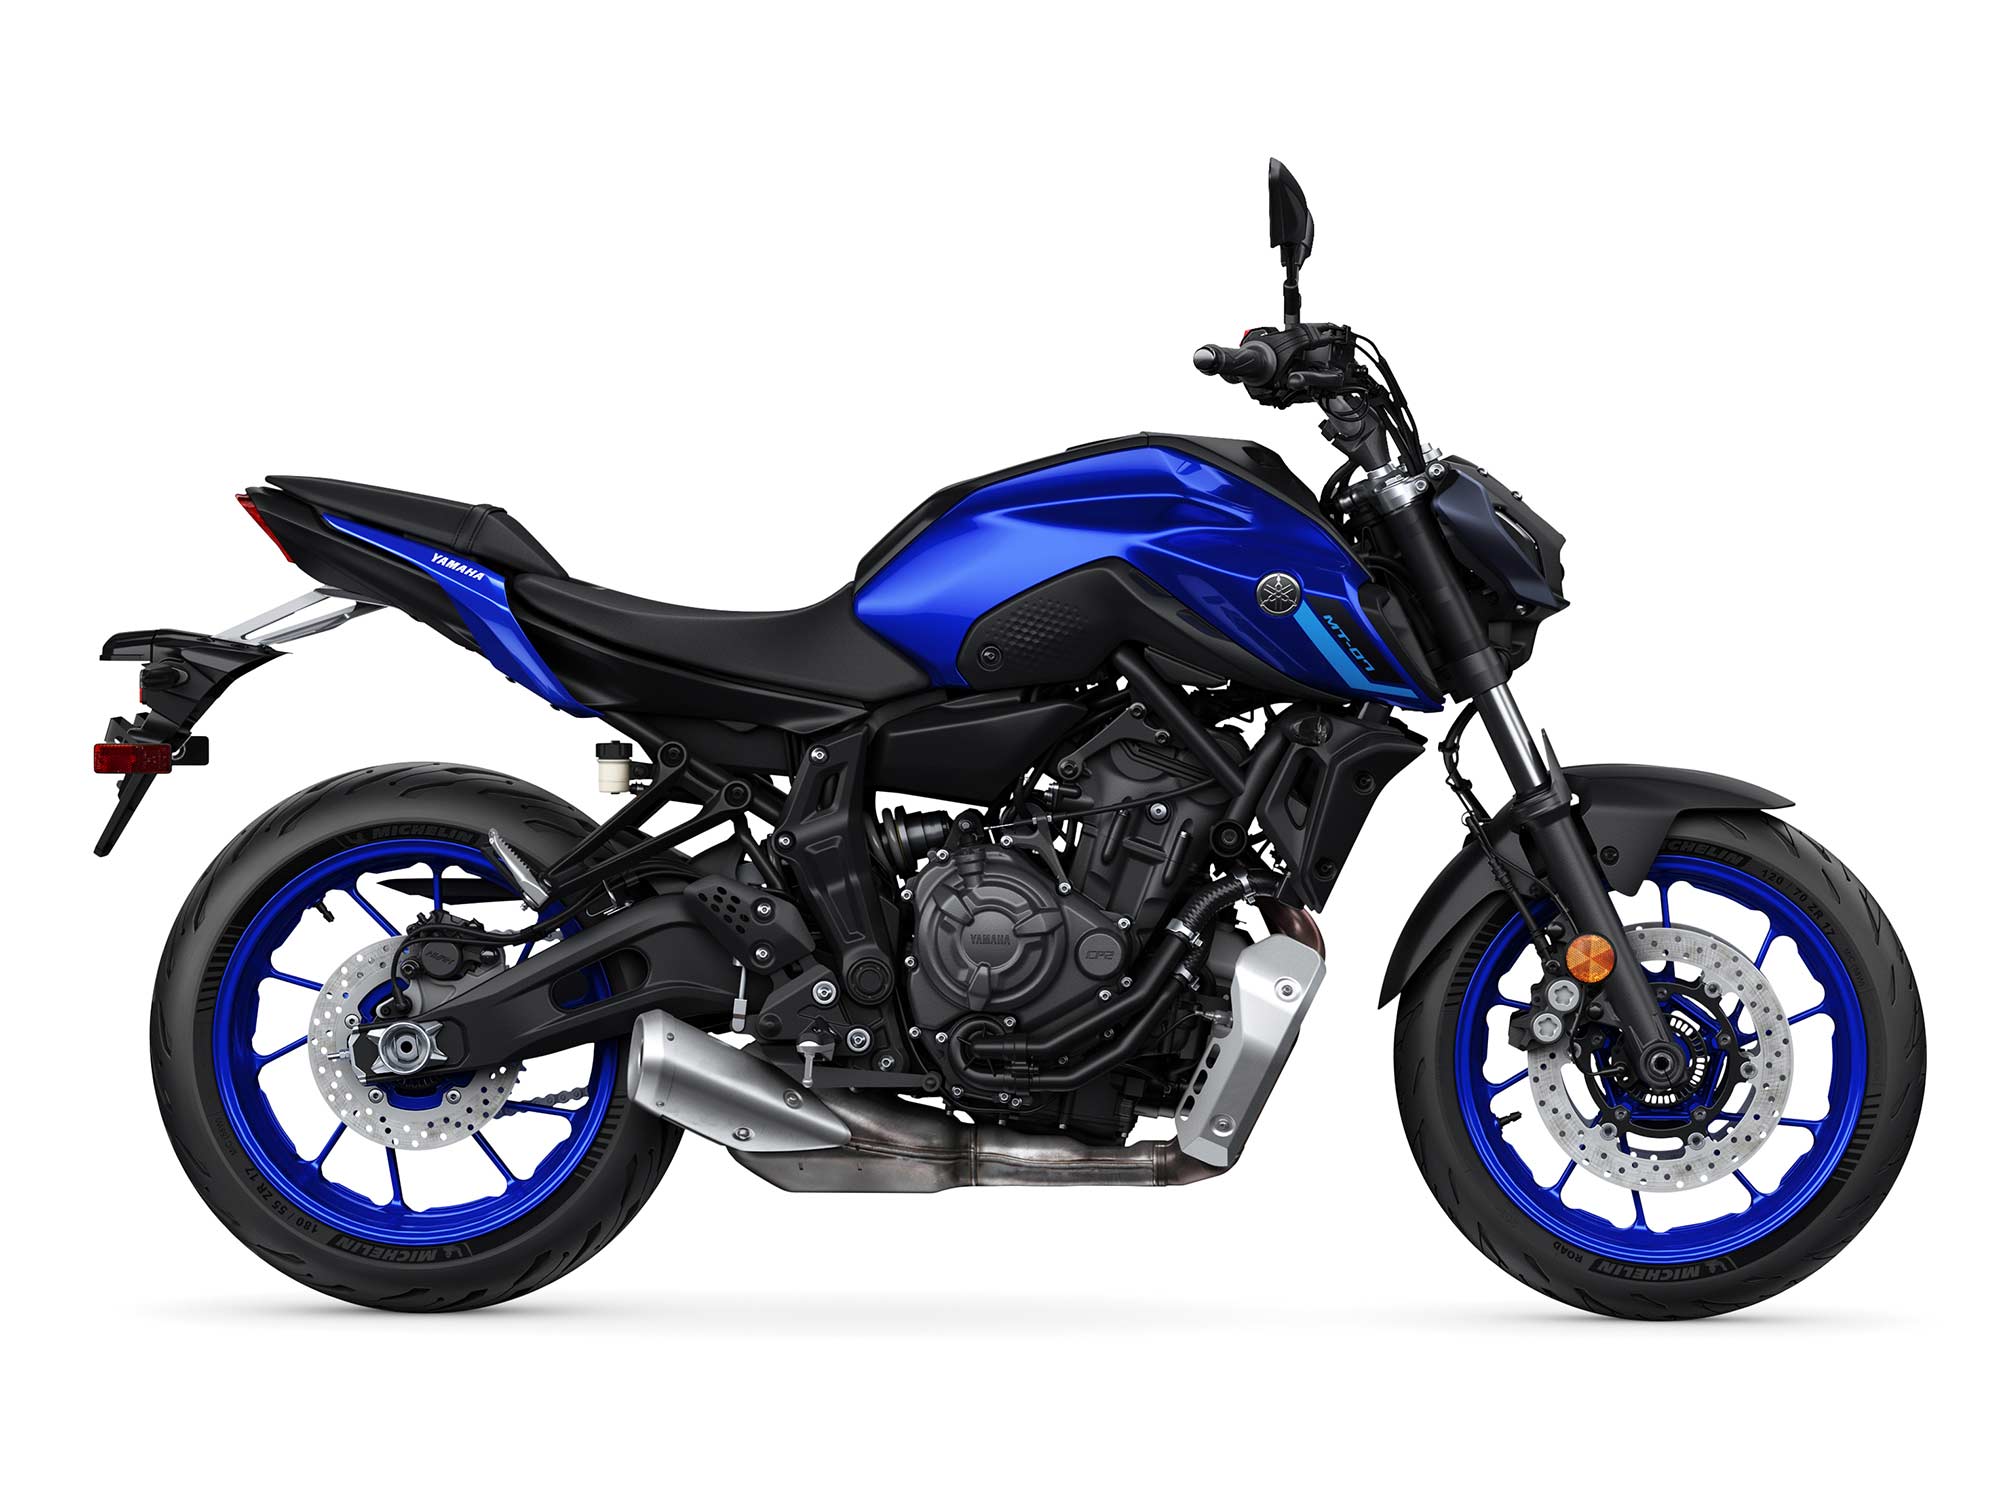 Facturable censura aplausos 2023 Yamaha MT-07 Buyer's Guide: Specs, Photos, Price | Cycle World